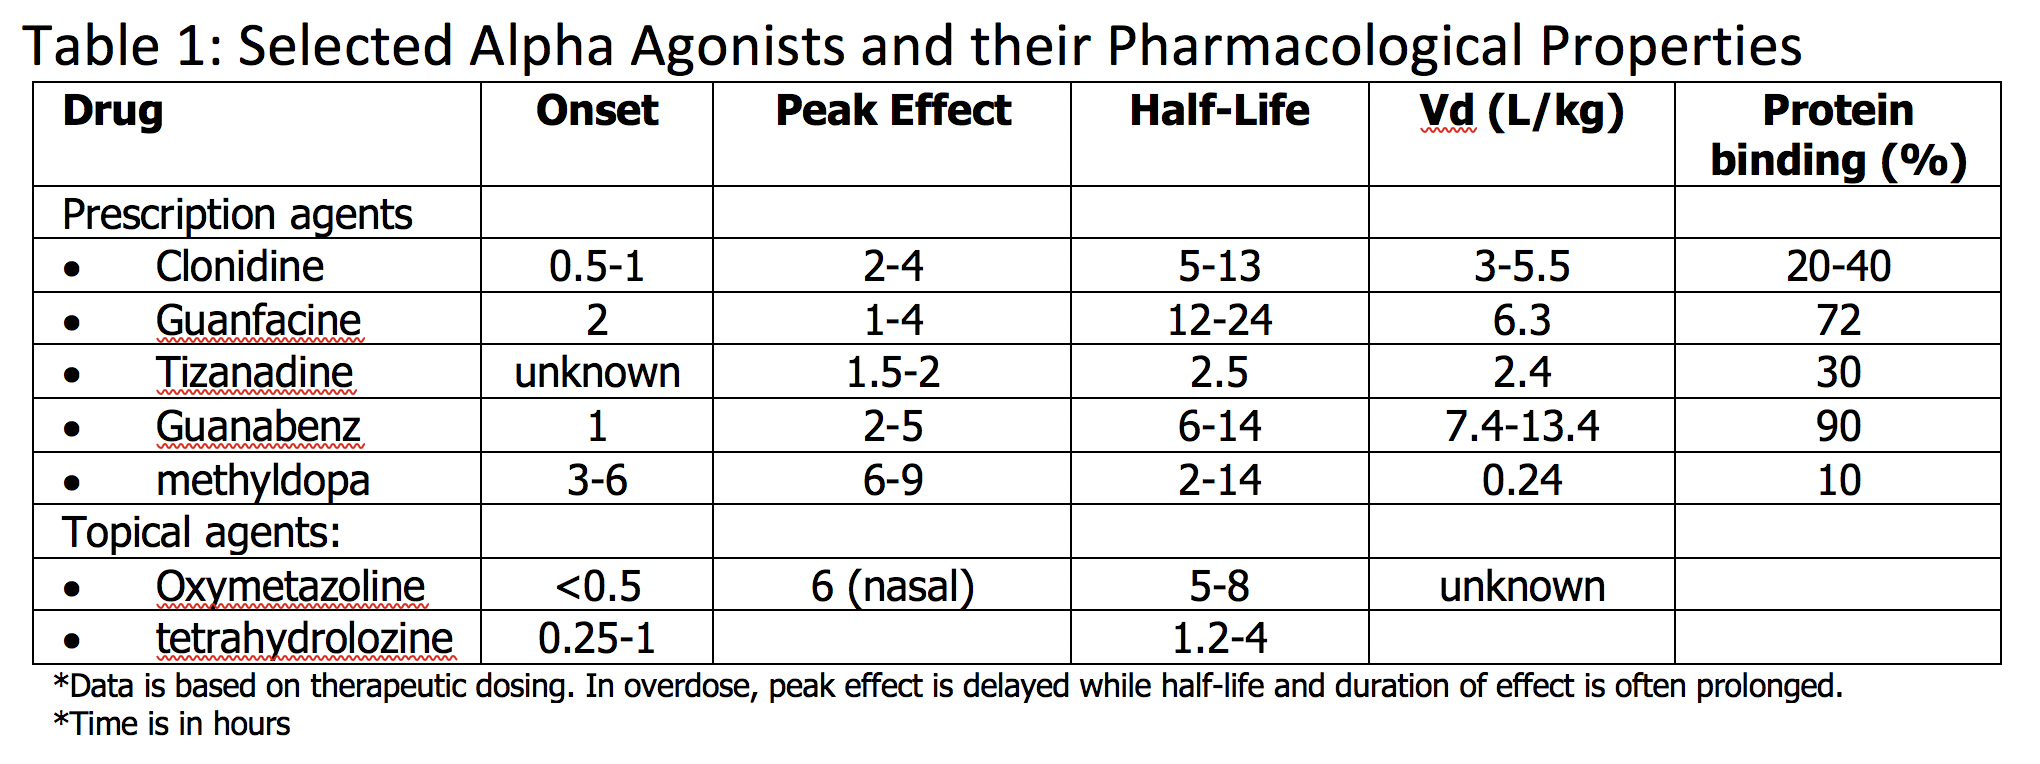 Selected Alpha Agonists and their Pharmacological Properties